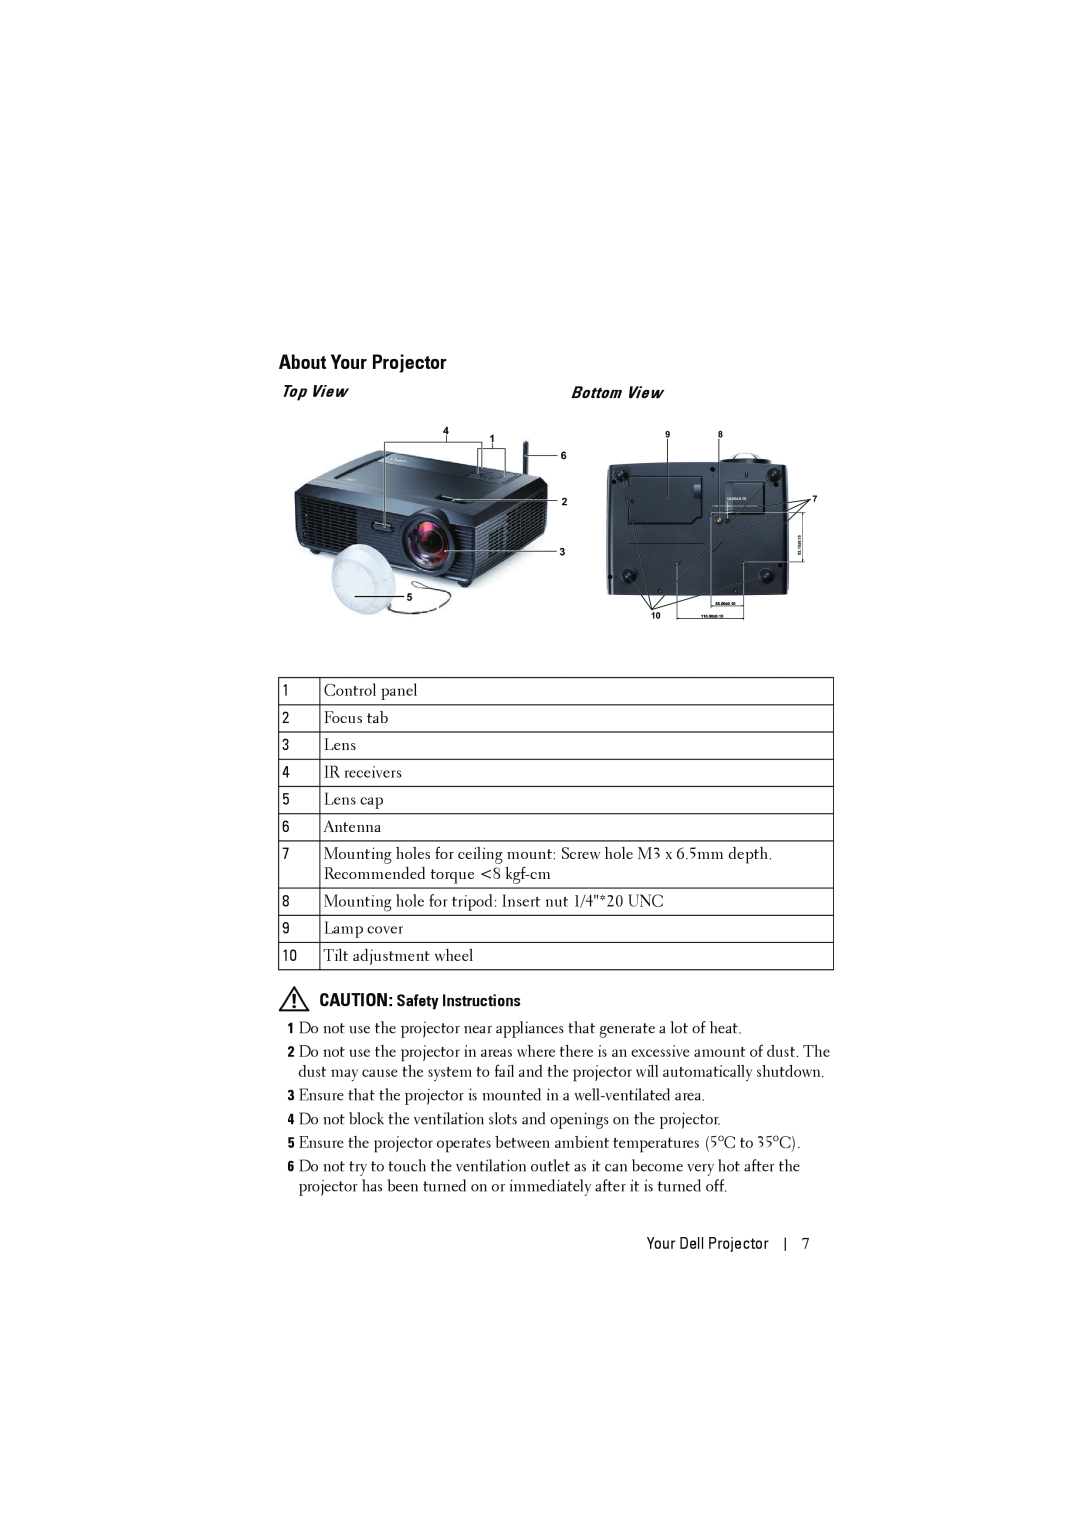 Dell S300W manual About Your Projector, Top View, Bottom View, CAUTION Safety Instructions 